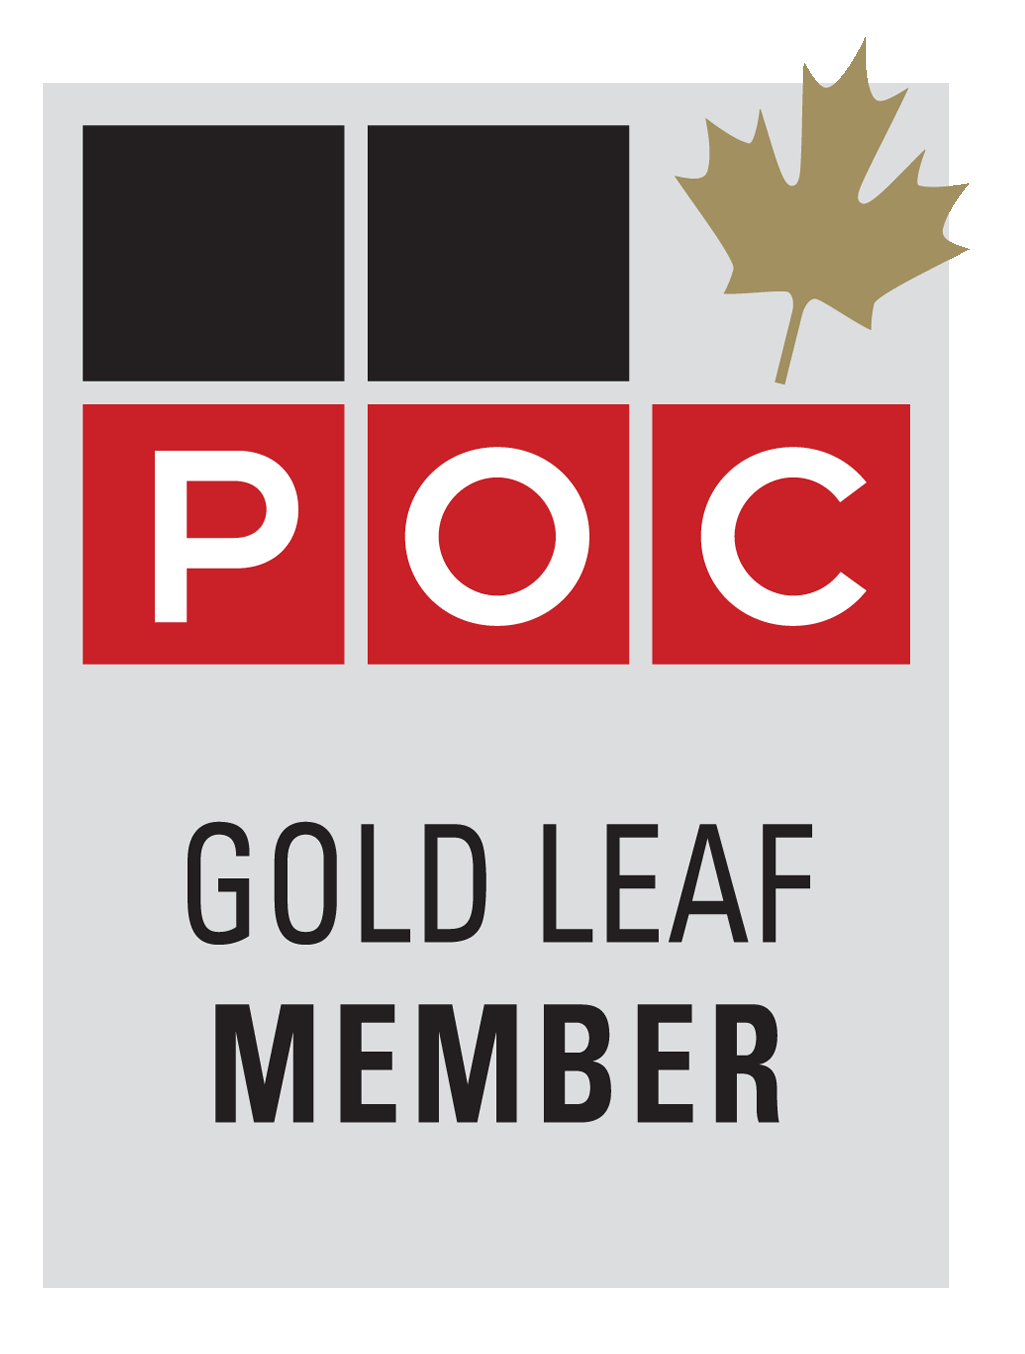 Professional Organizers of Canada Gold Leaf Member